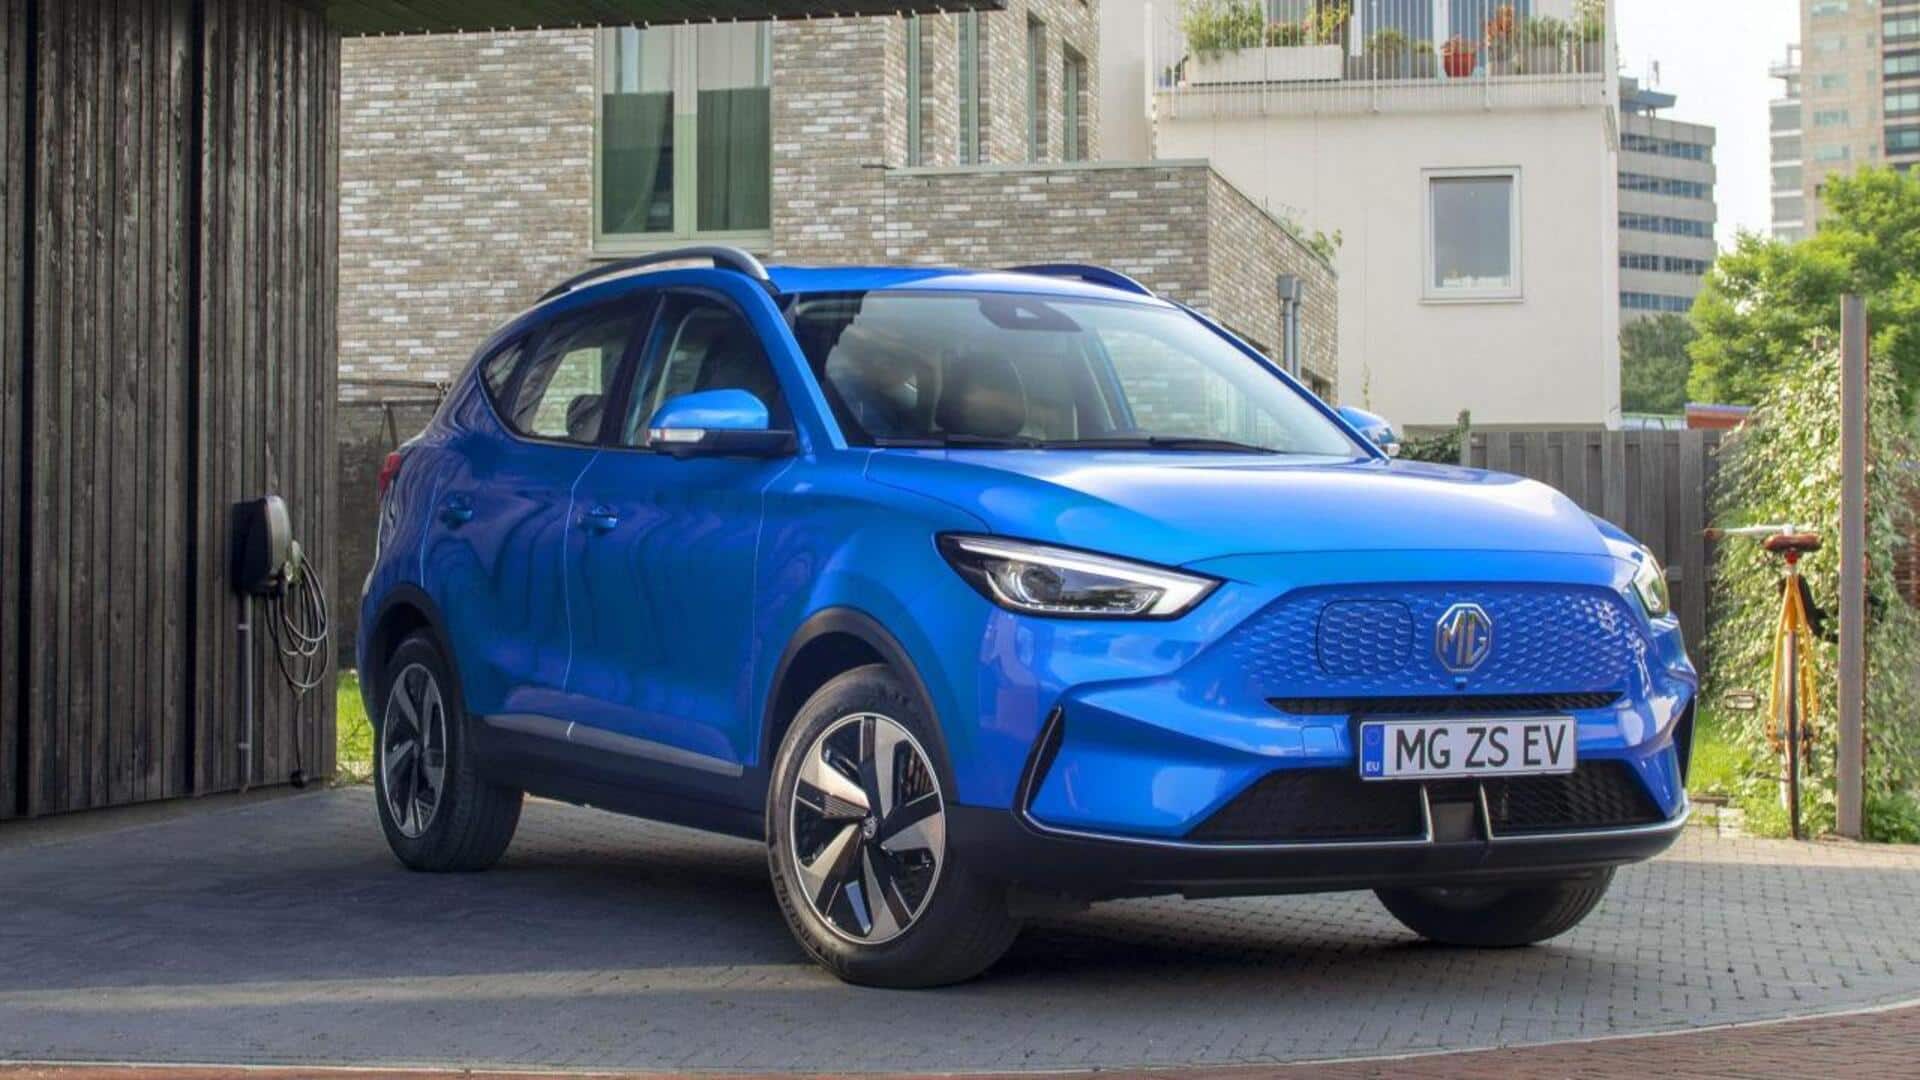 MG Motor offers cheaper charging for ZS EV owners